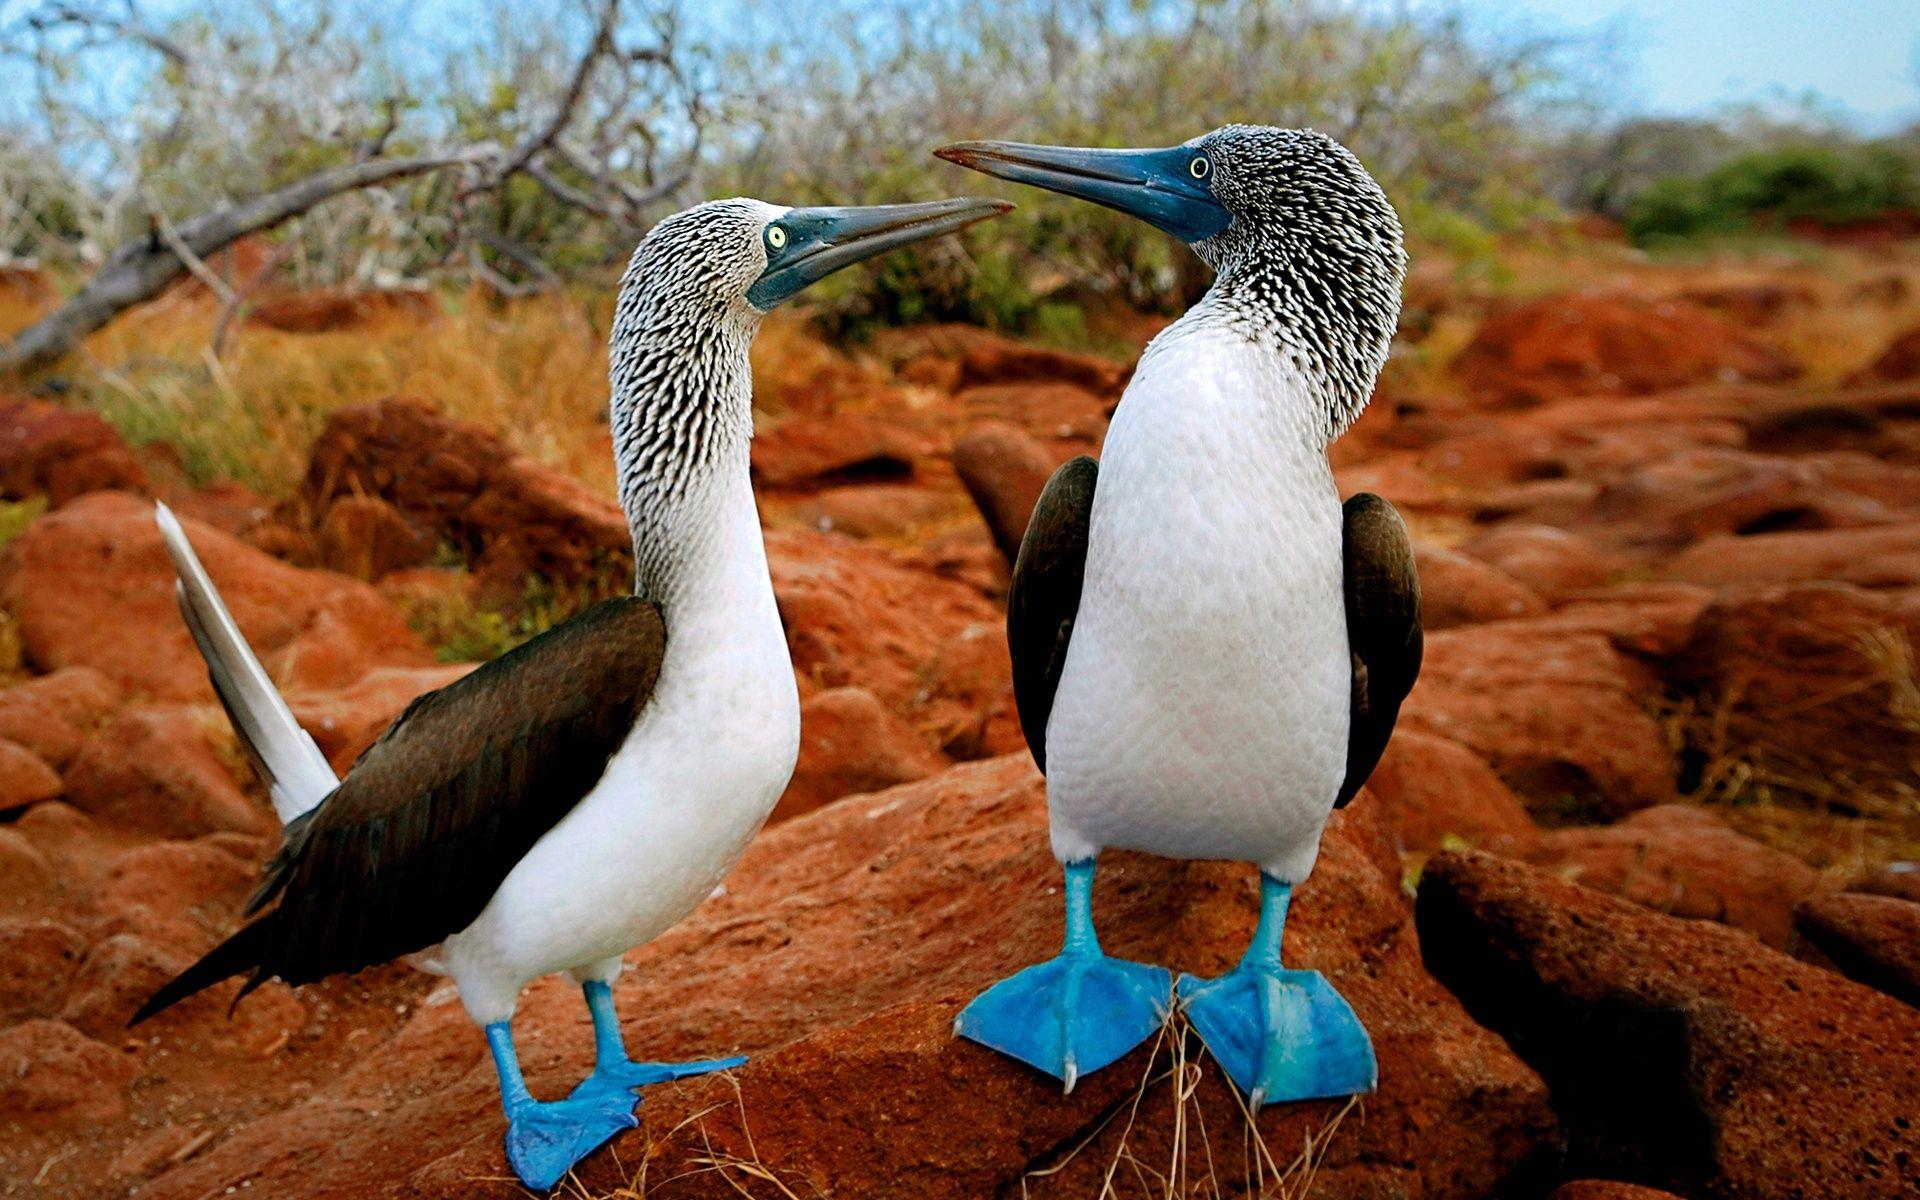 The Galapagos Islands: A Natural Selection for Divers